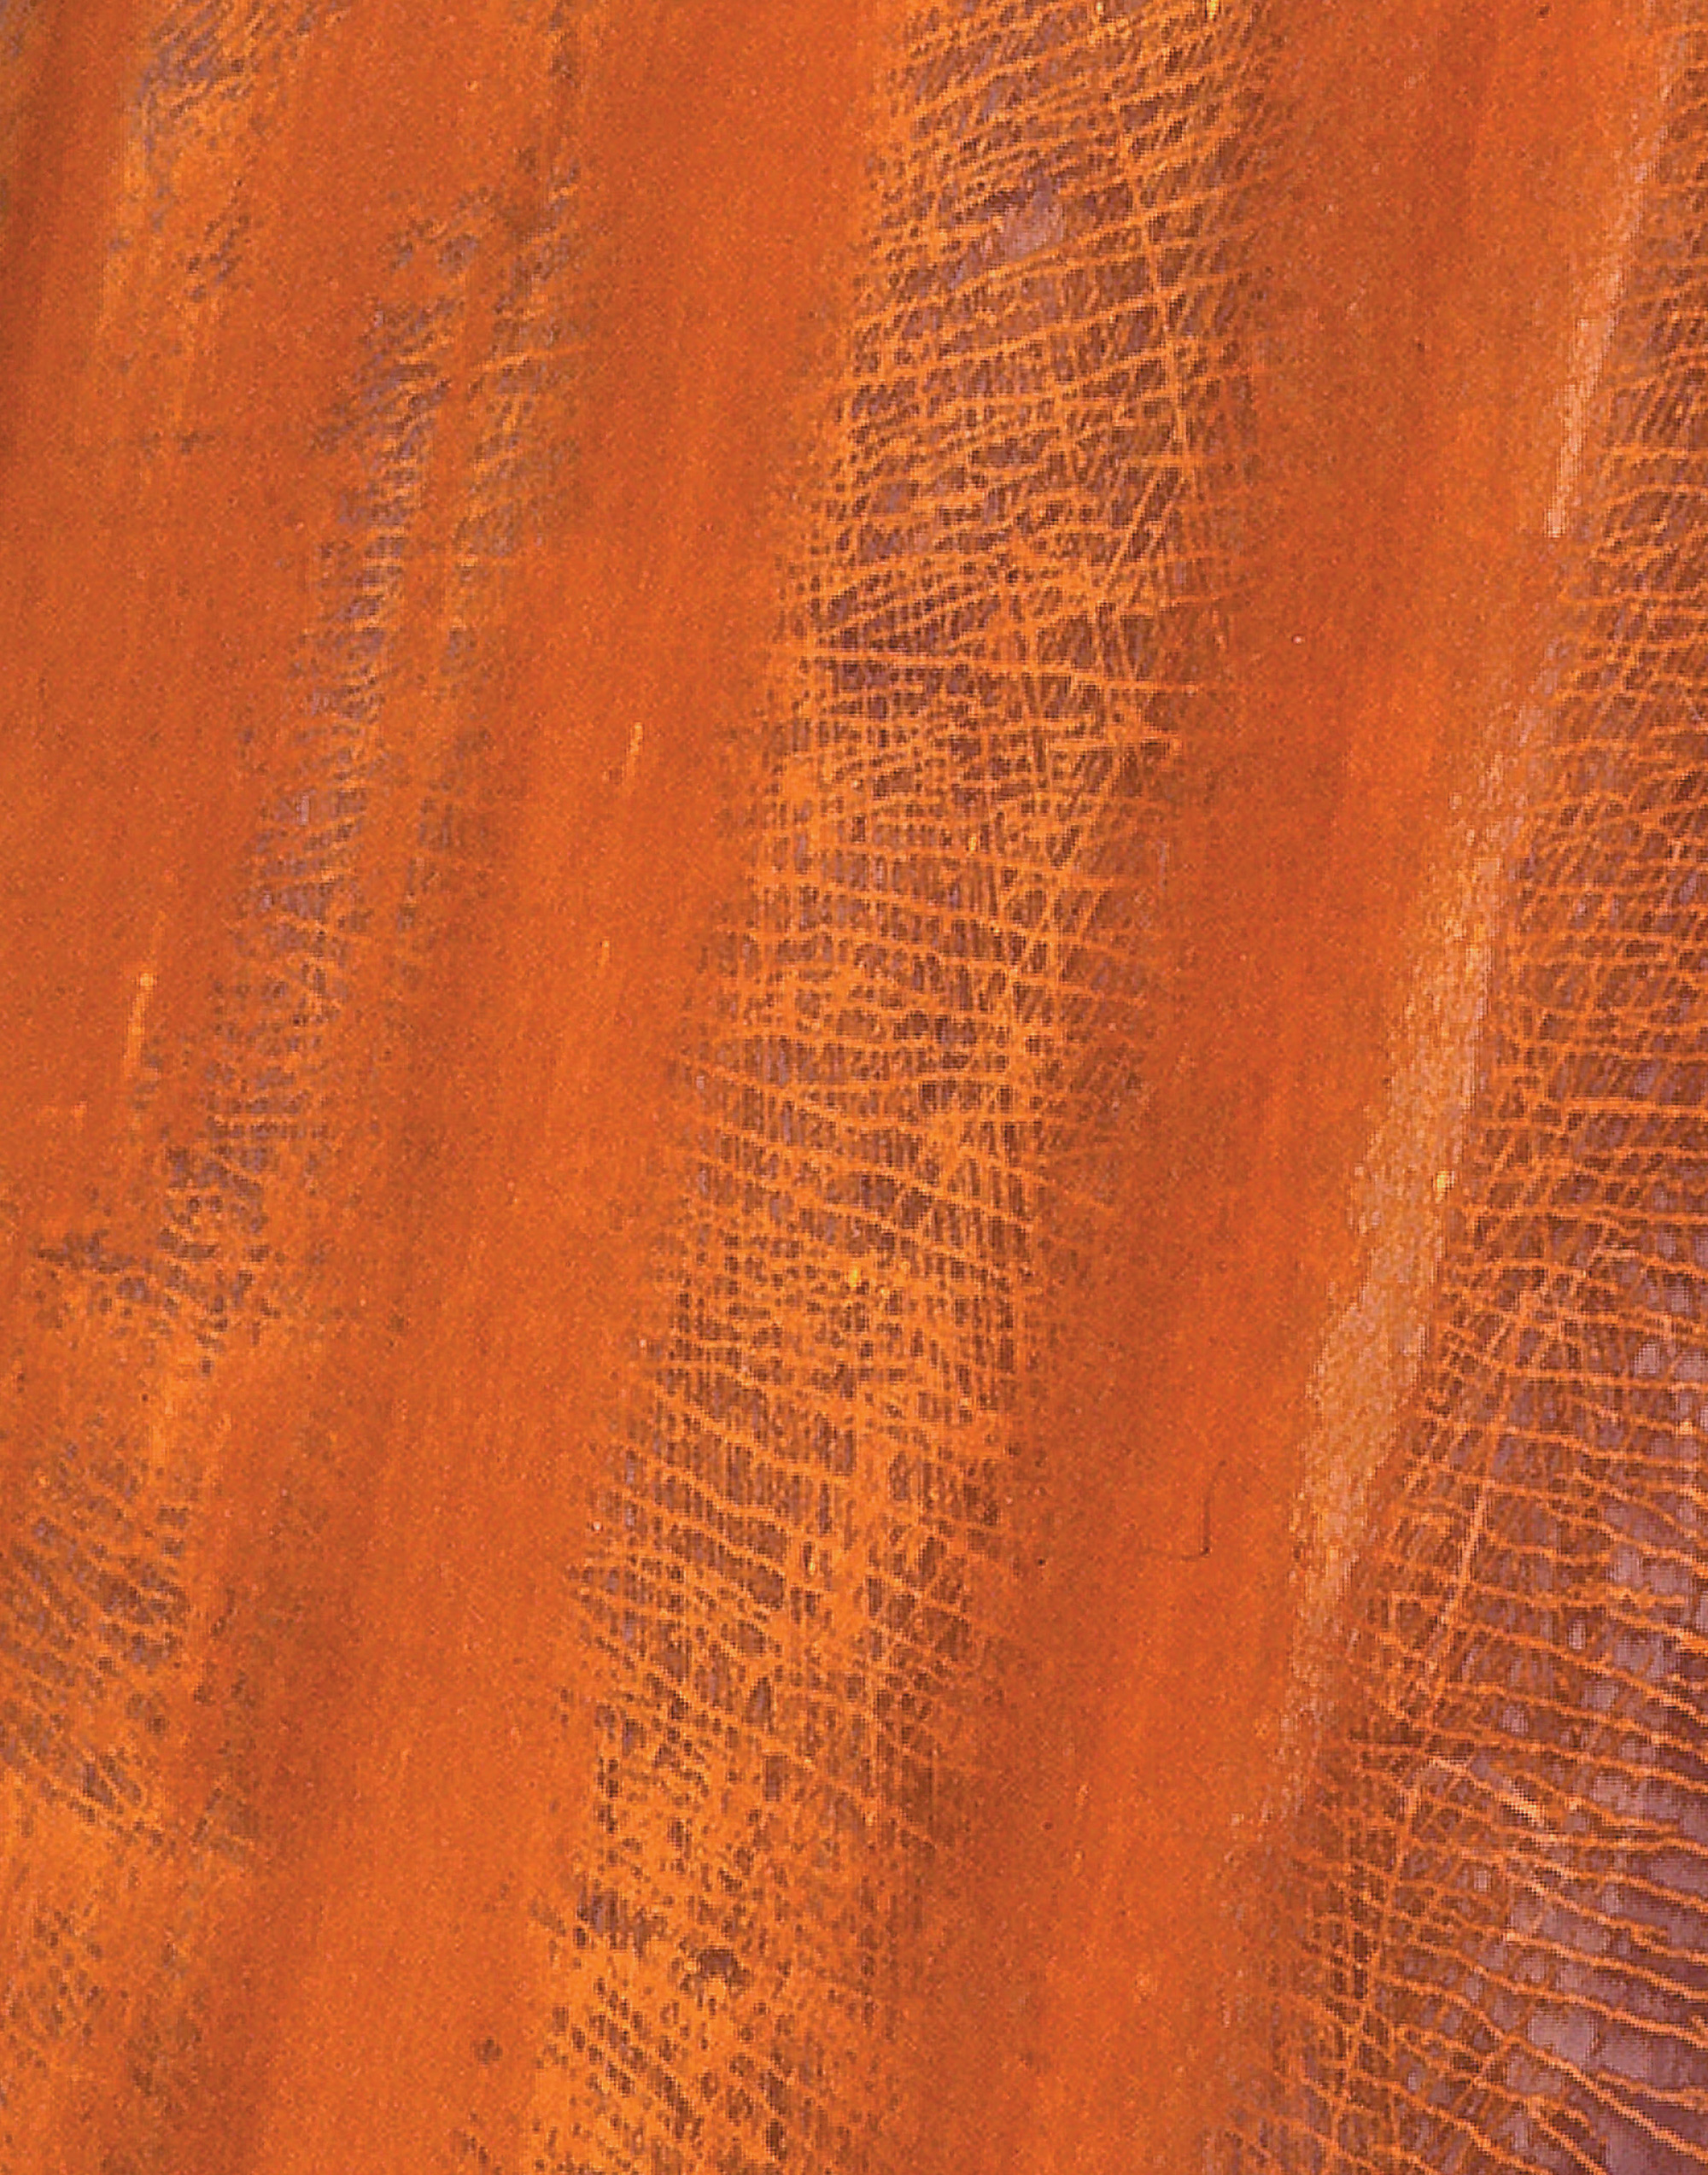 A photograph showing a detail of the rusty surface of Richard Serra's 2001 sculpture 